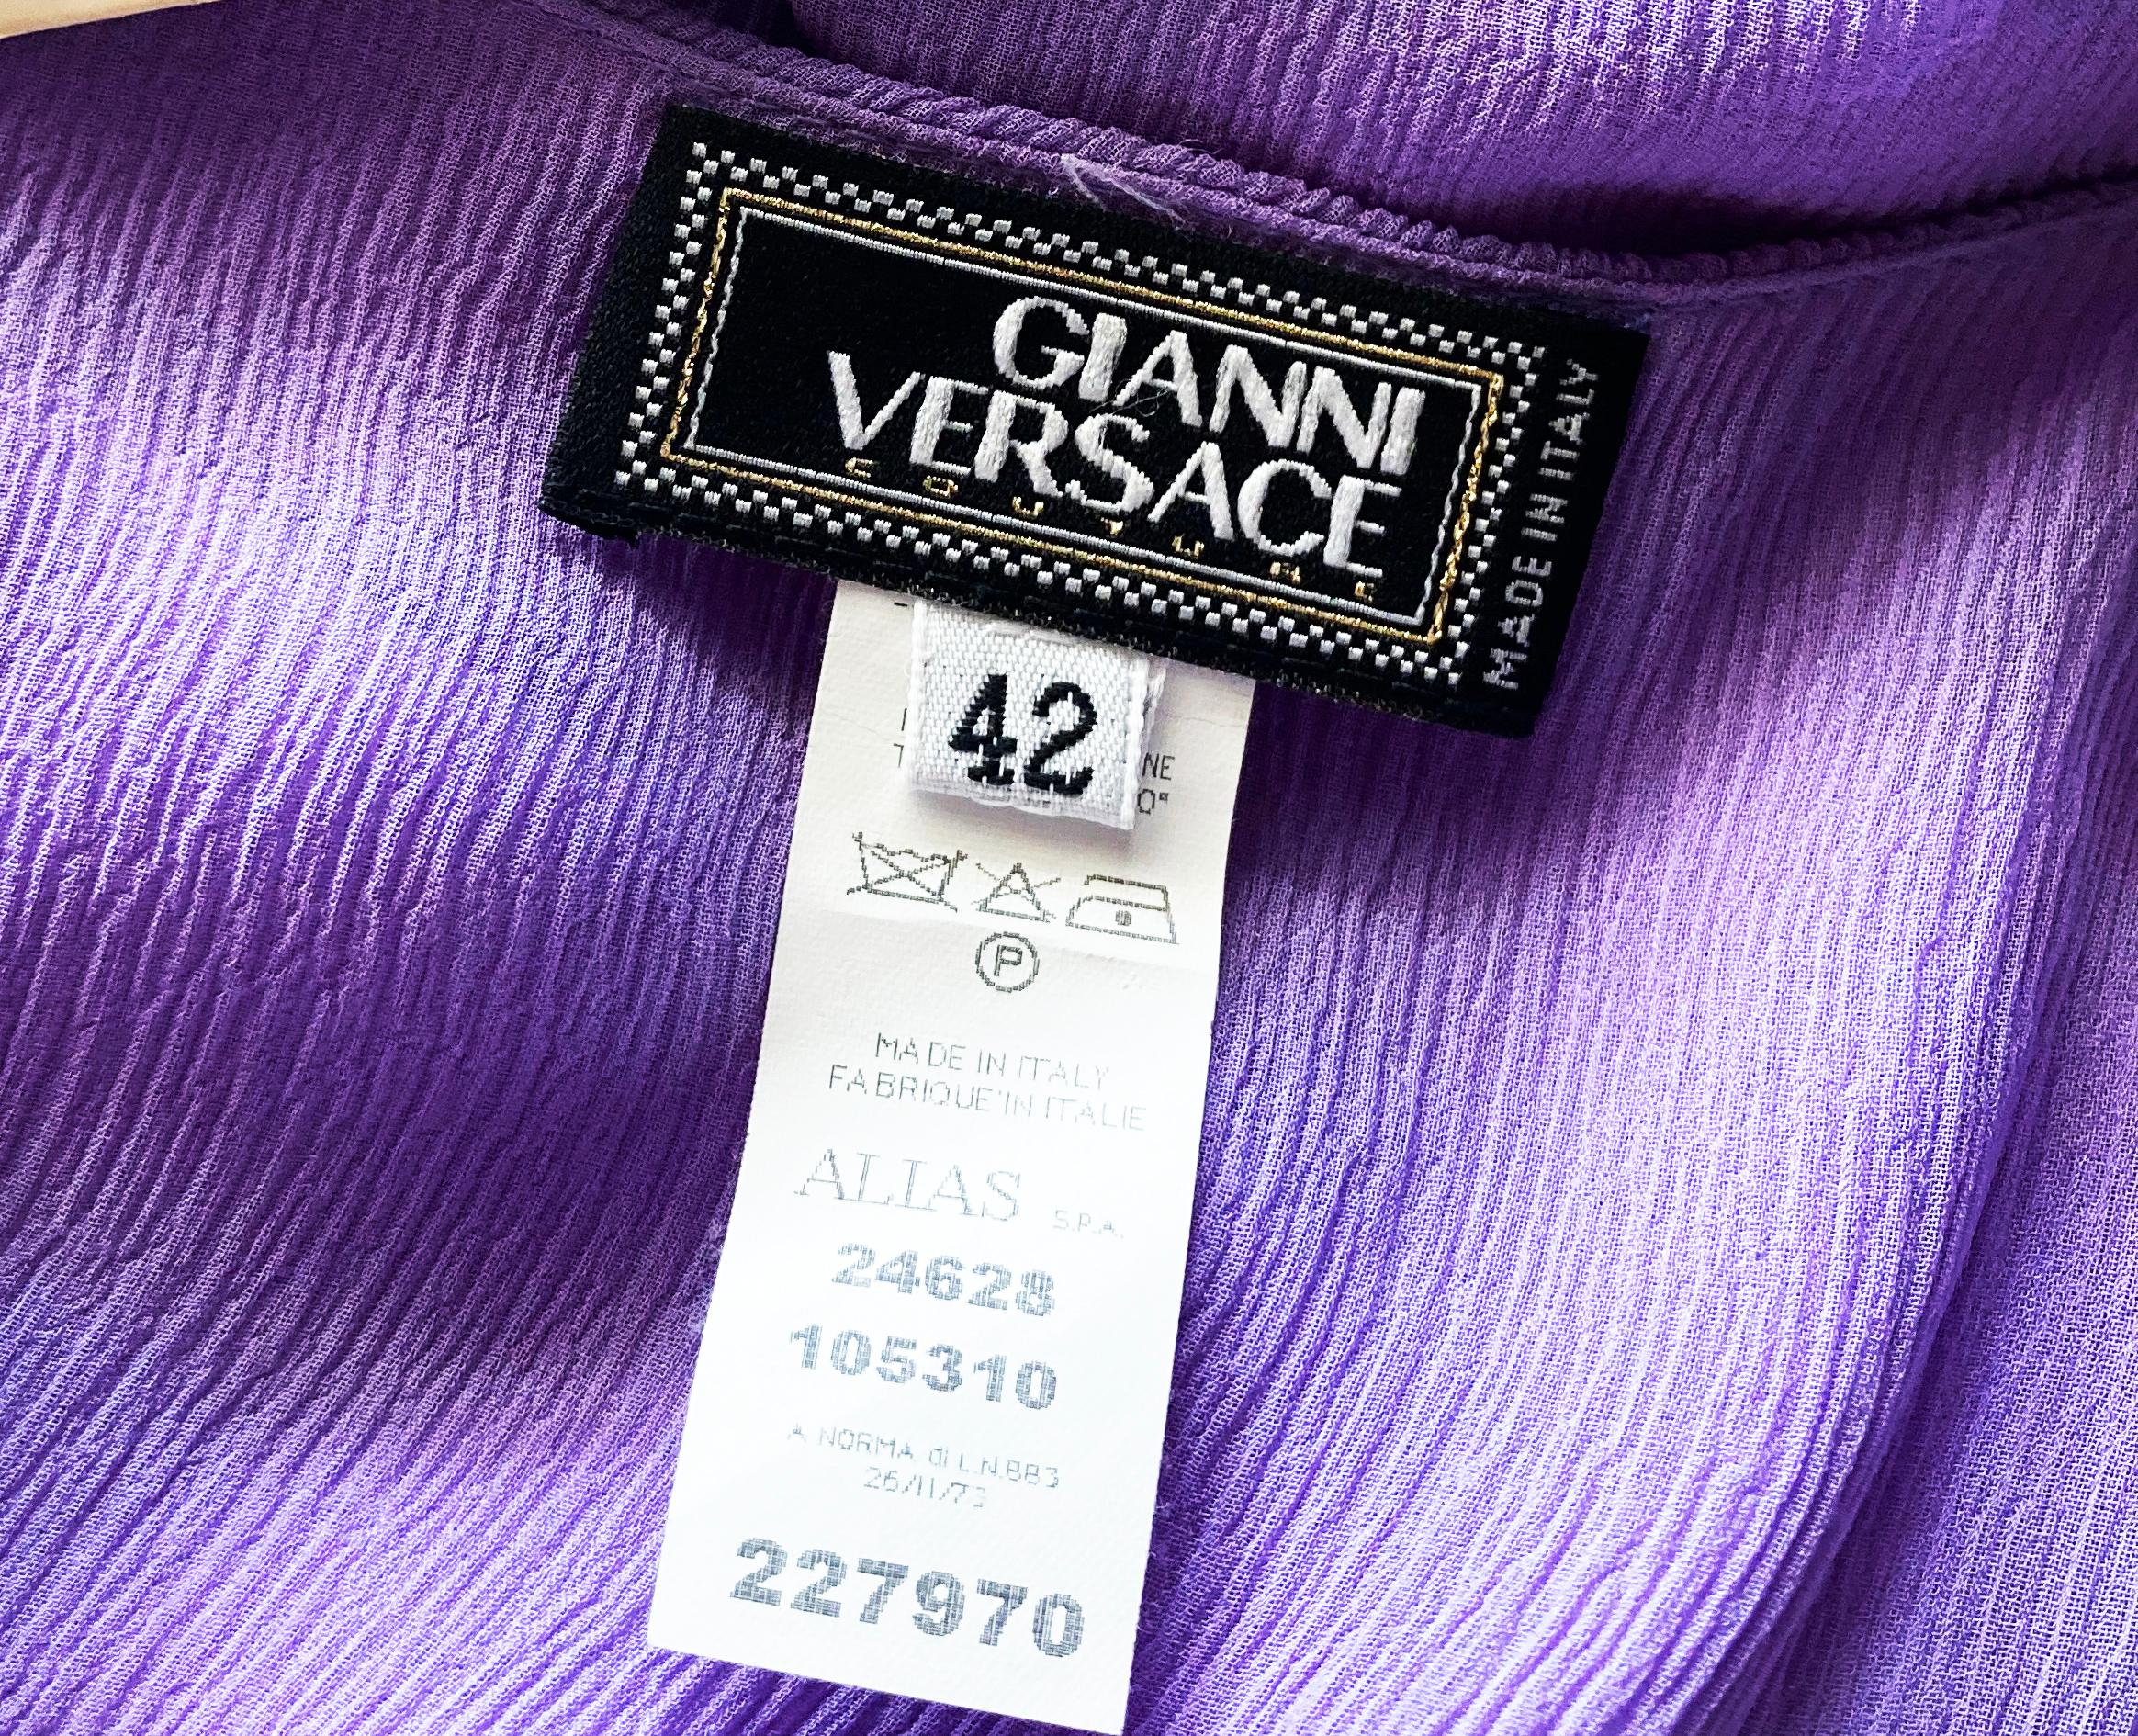 VINTAGE GIANNI VERSACE COUTURE OPEN BACK LILAC SILK DRESS Size 42 - 6 10